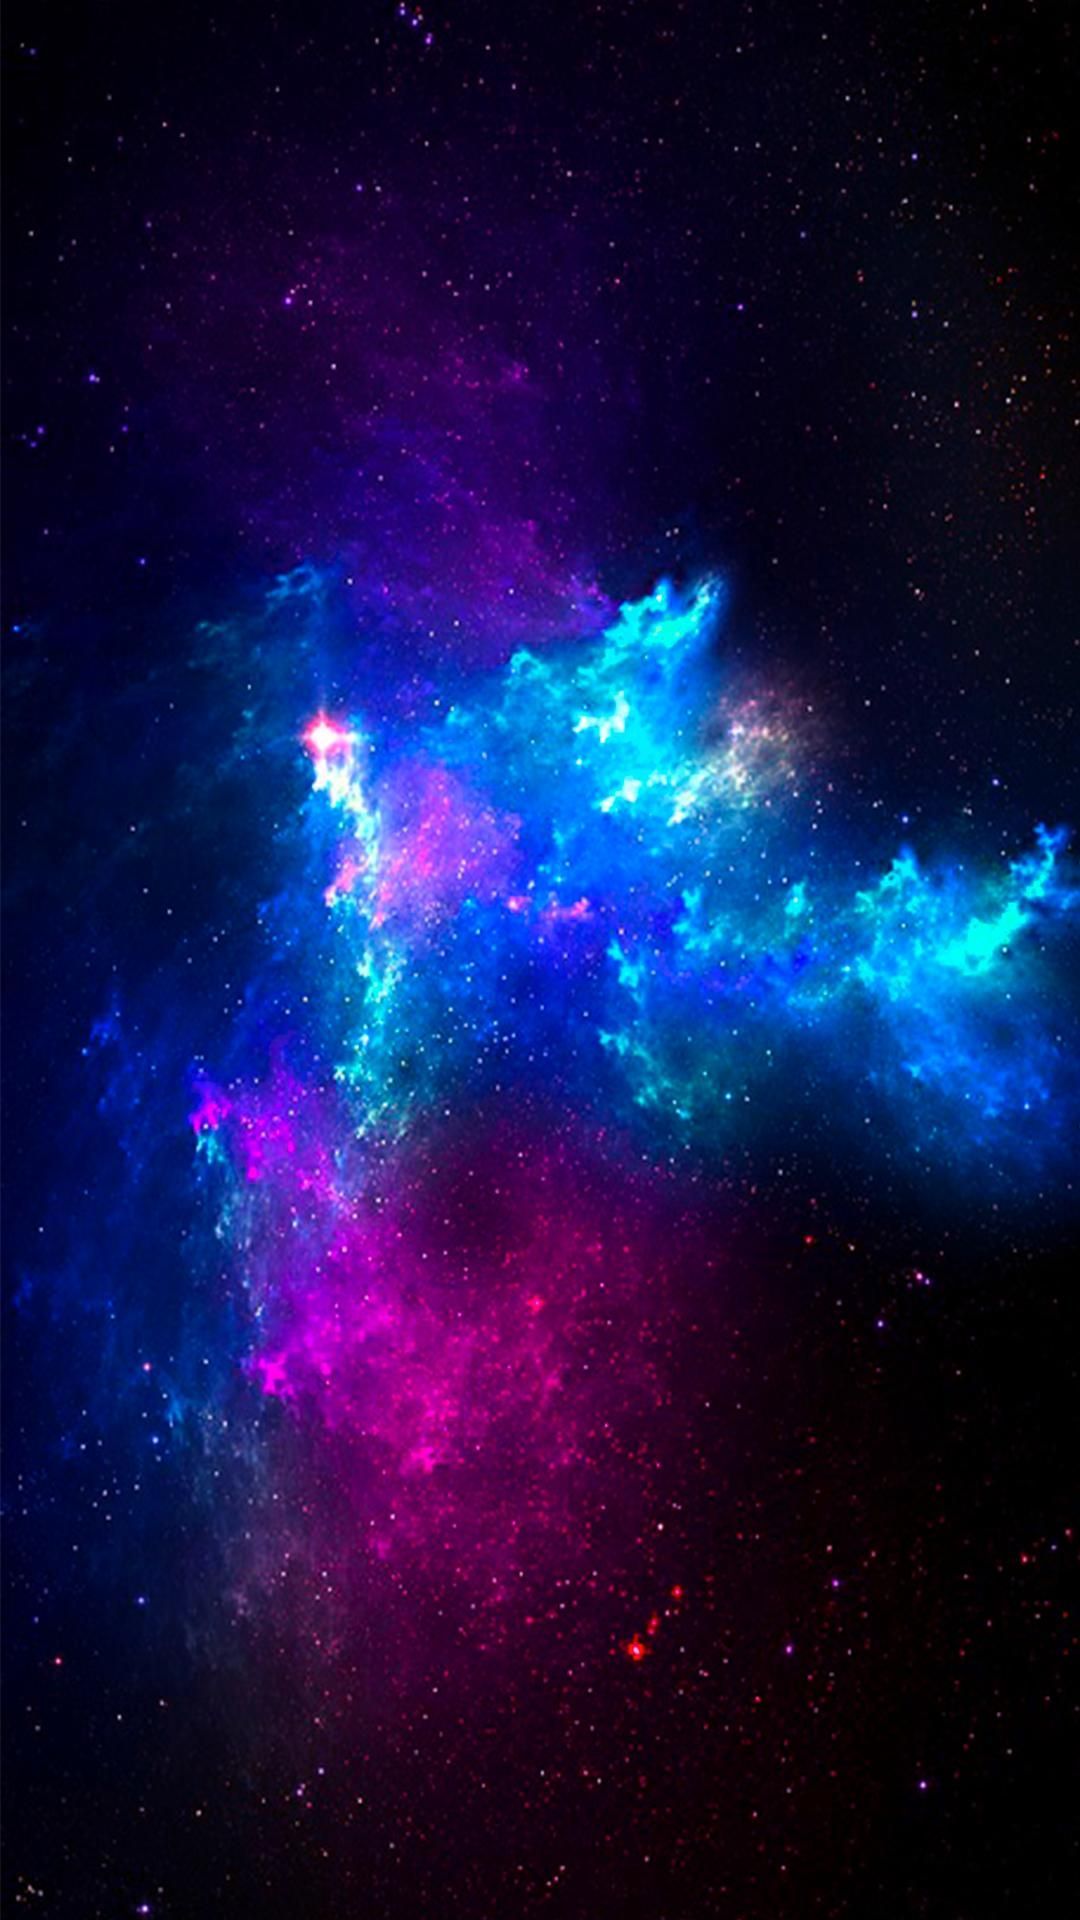 Galaxy Wallpaper 1080p Hupages Download iPhone Wallpaper. Space phone wallpaper, Galaxy phone wallpaper, Wallpaper space